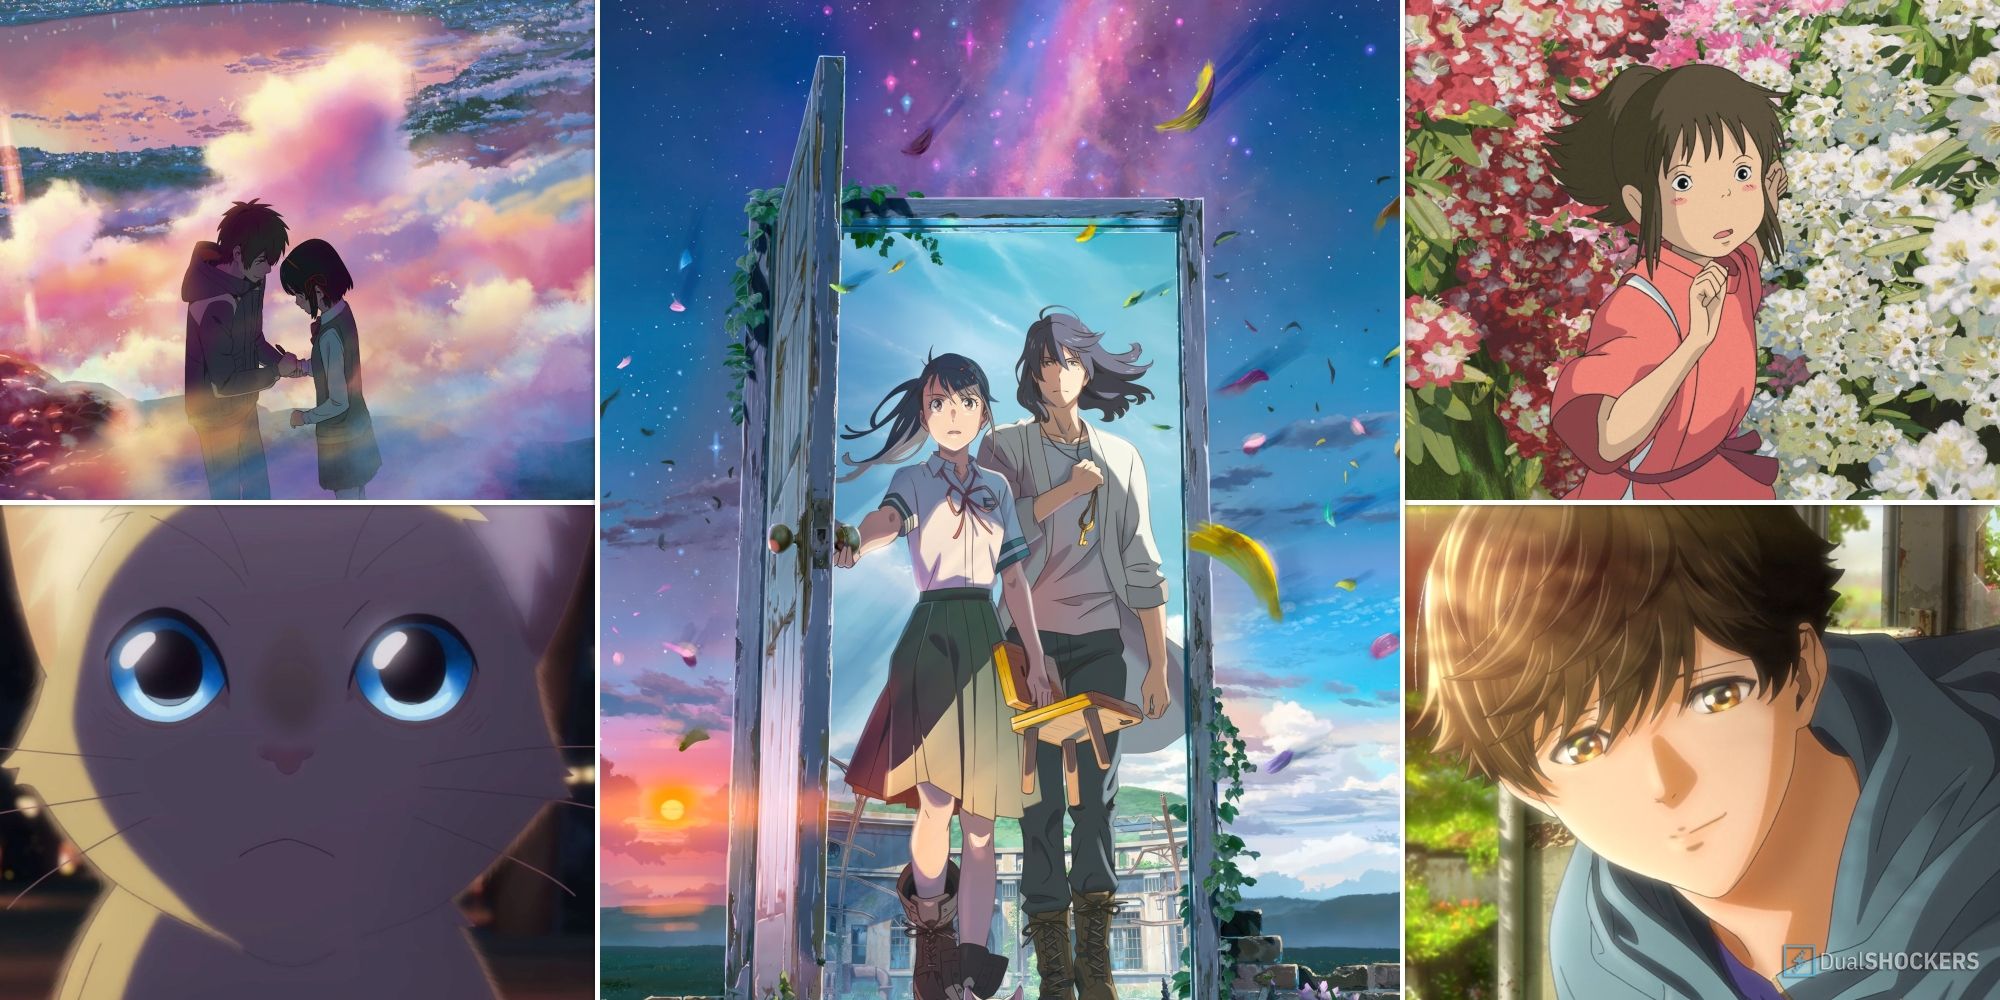 Studio Ghibli offering reprints of posters from all its anime films made  from original plates | SoraNews24 -Japan News-